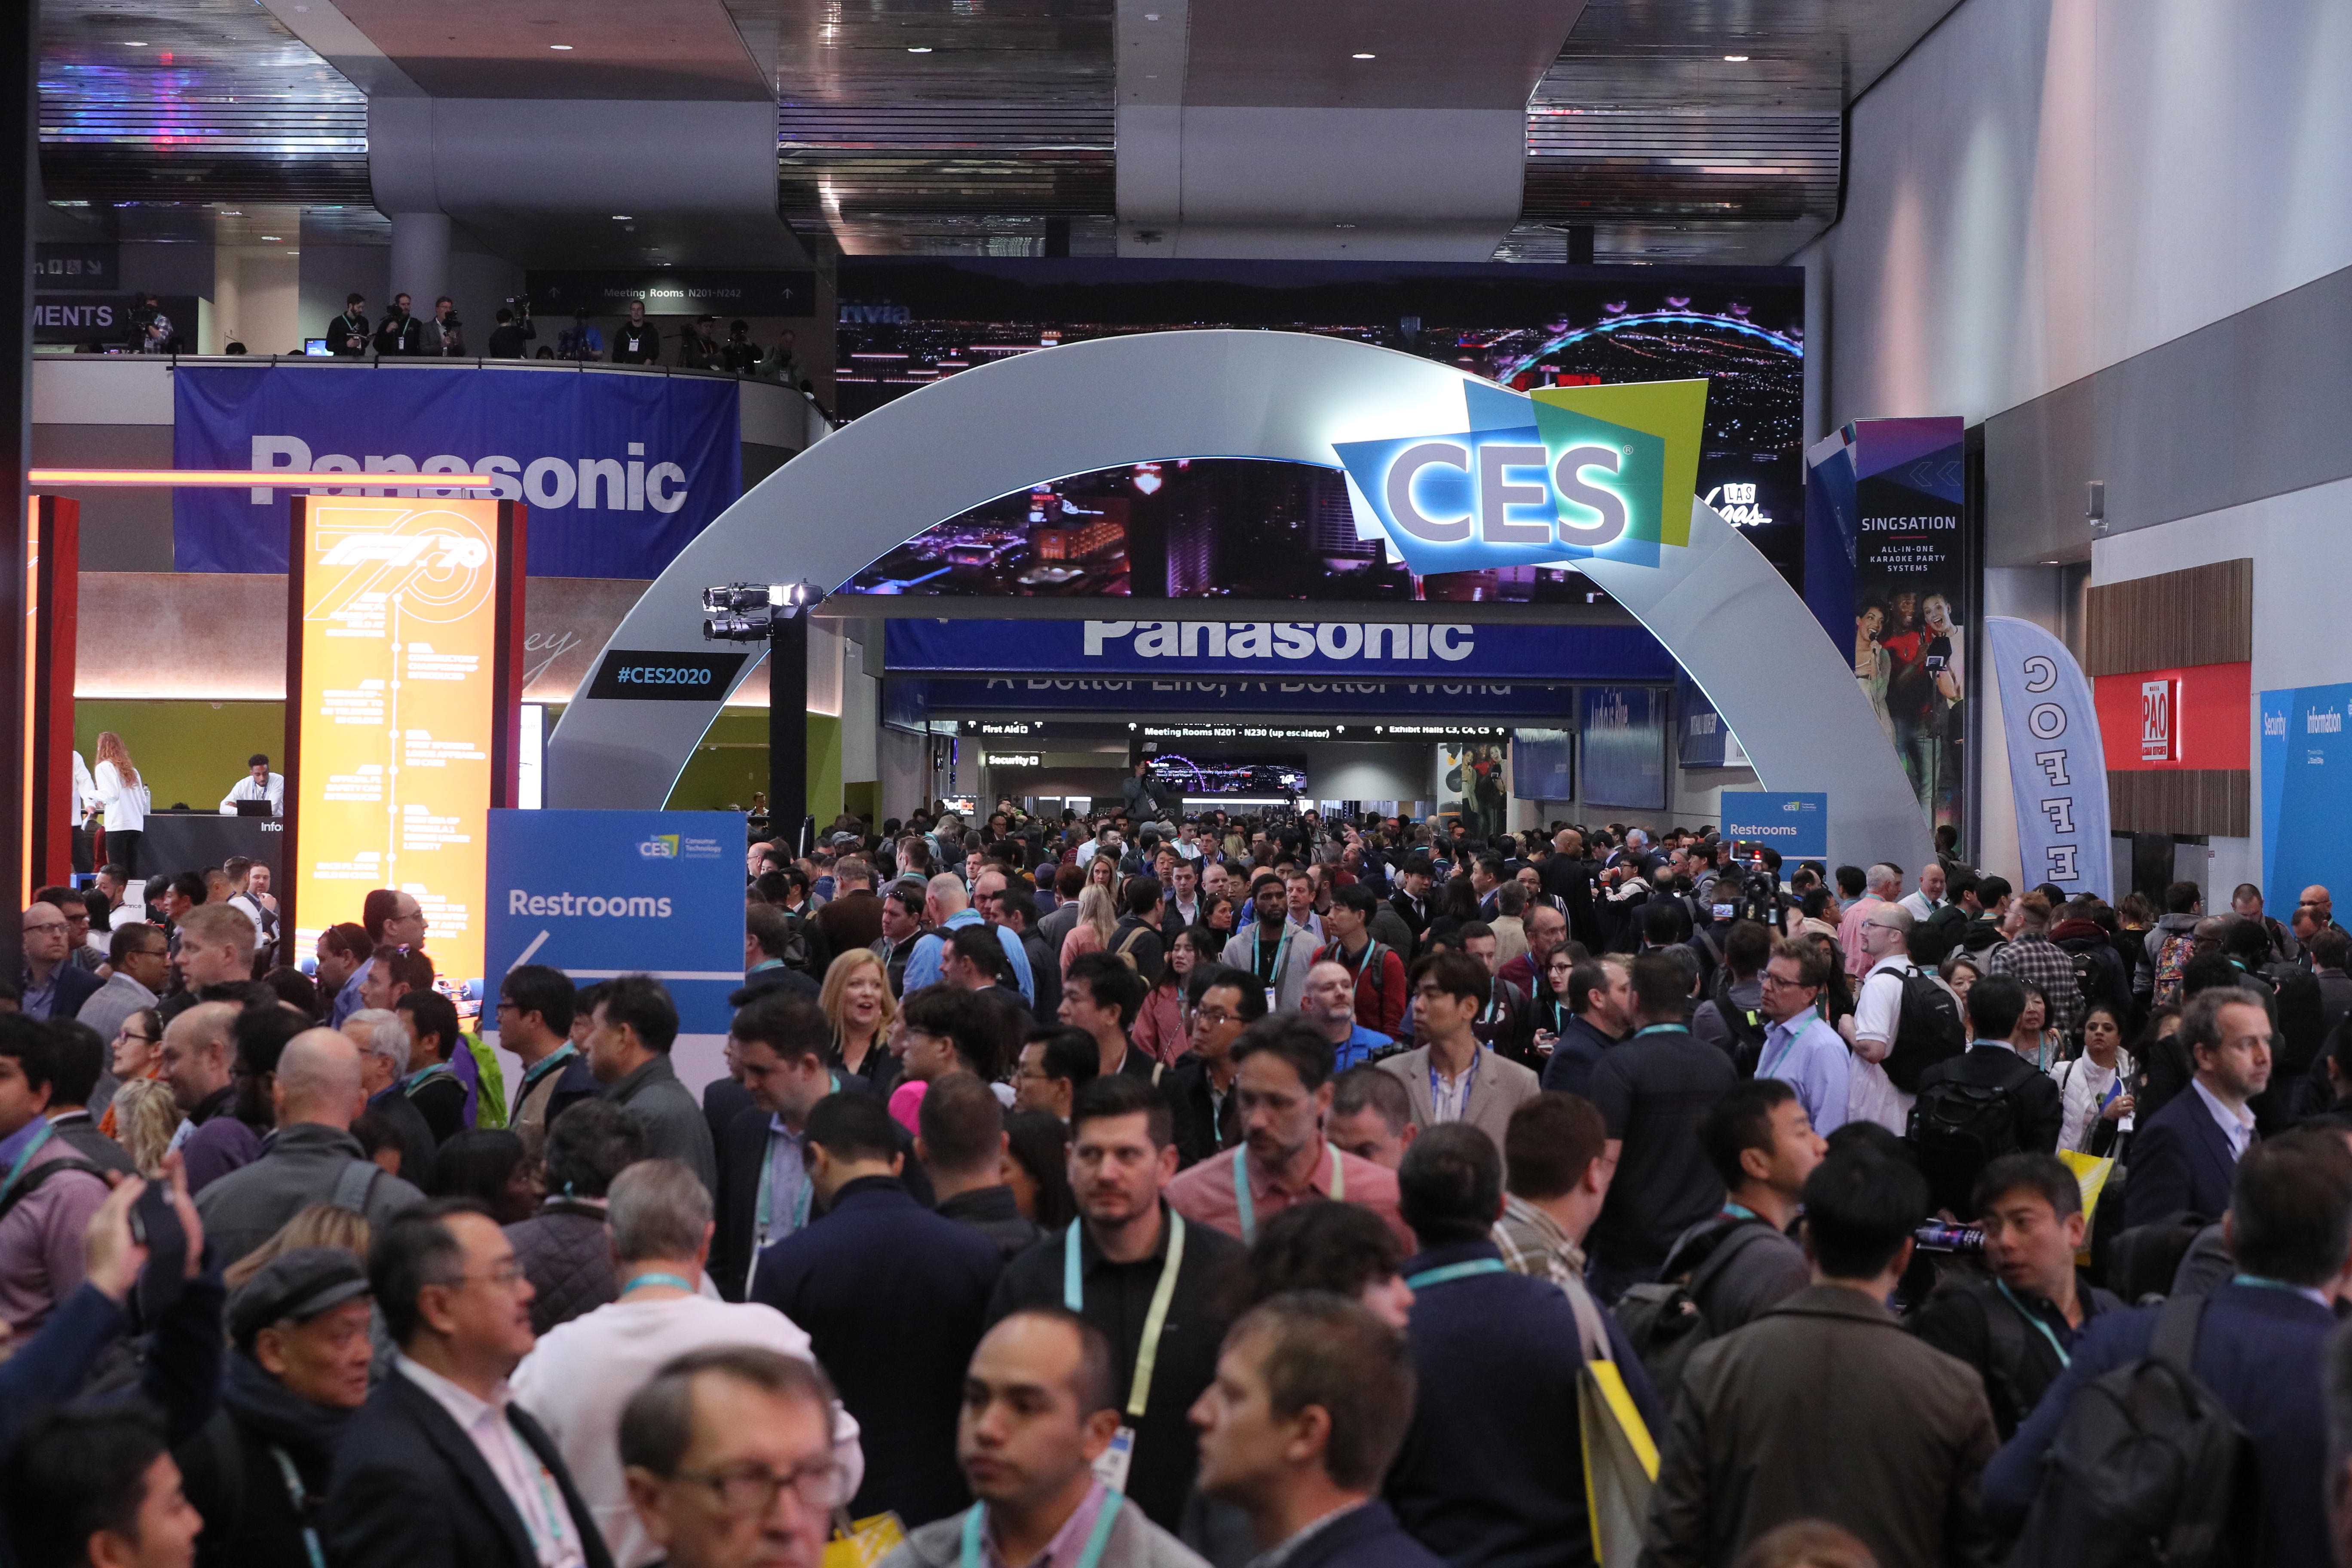 crowd of attendees walking the CES 2020 show floor